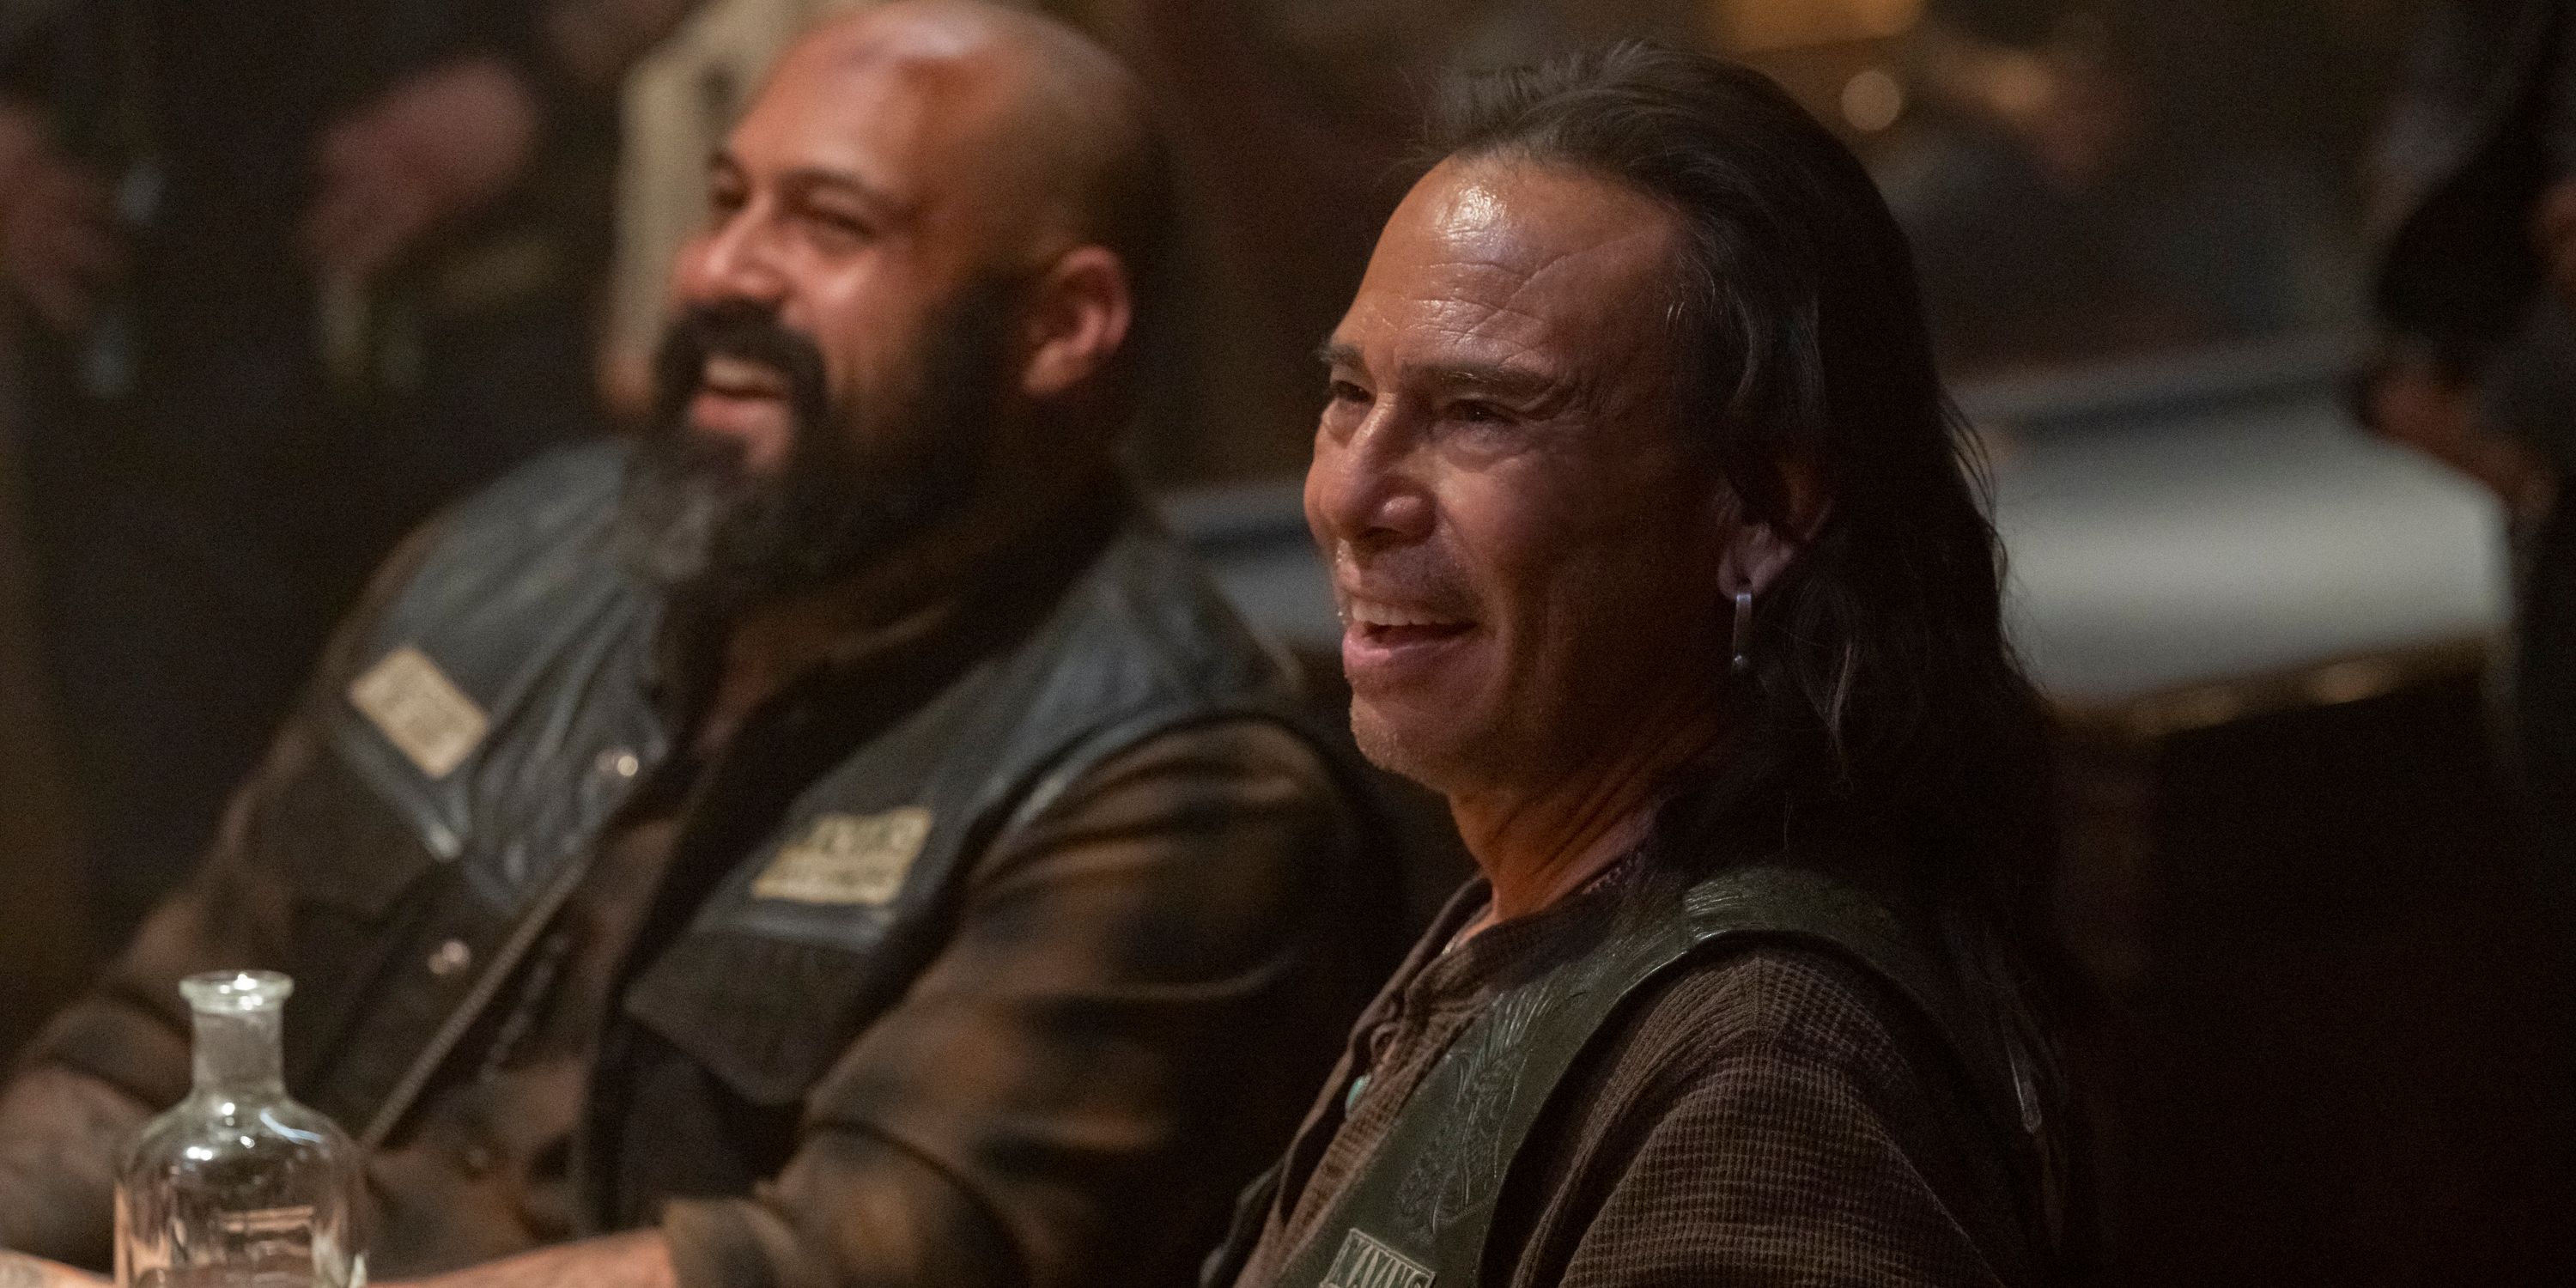 Mayans M.C. Recap & Spoilers S3, E9, 'The House of Death Floats By'